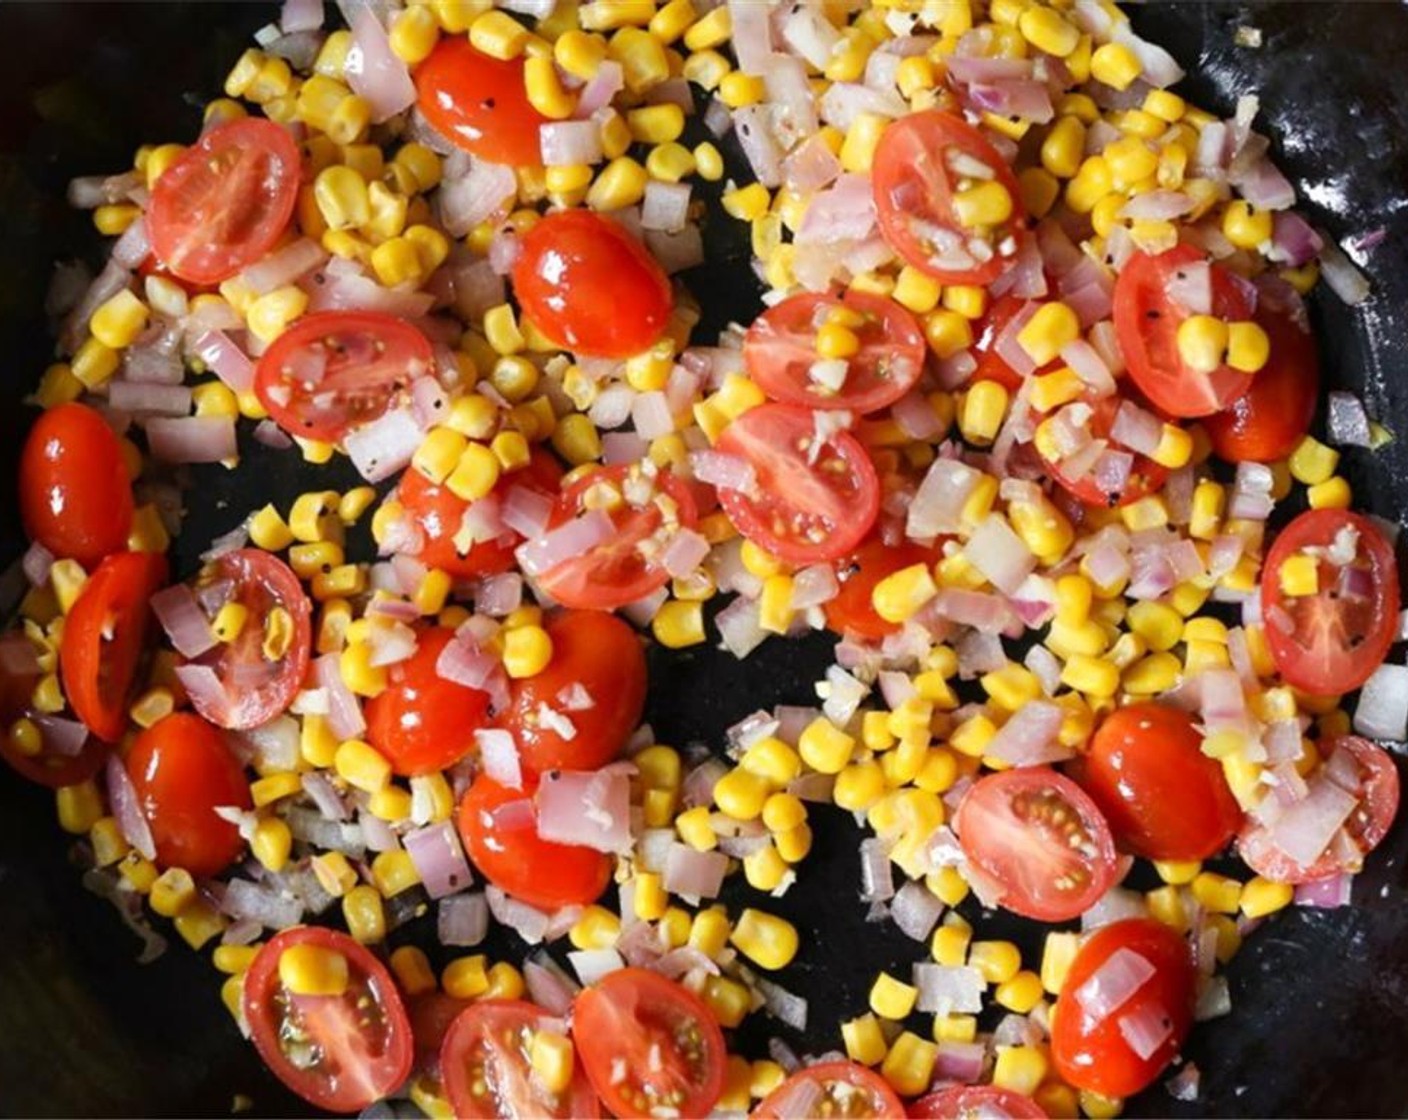 step 4 Season with Kosher Salt (to taste), Finely Ground Black Pepper (to taste). Cook until corn is tender and onions are translucent. Stir in Grape Tomatoes (1 cup)  and Garlic (3 cloves) and cook for 2 minutes until the tomatoes are just softened and the garlic is fragrant.